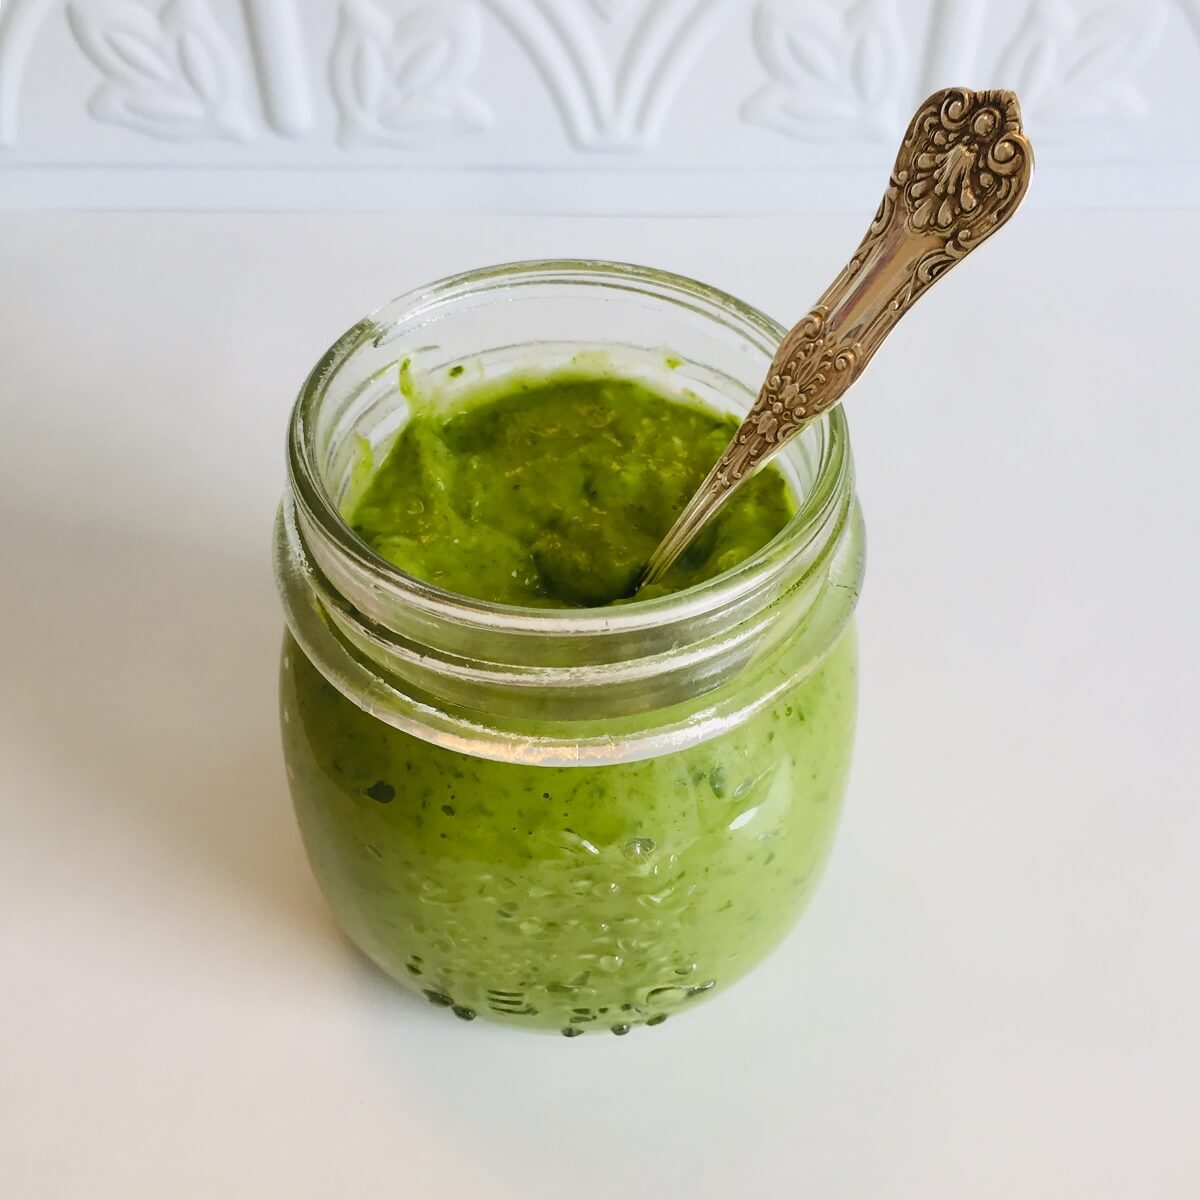 Paleo green goddess dressing in a jar with a spoon.